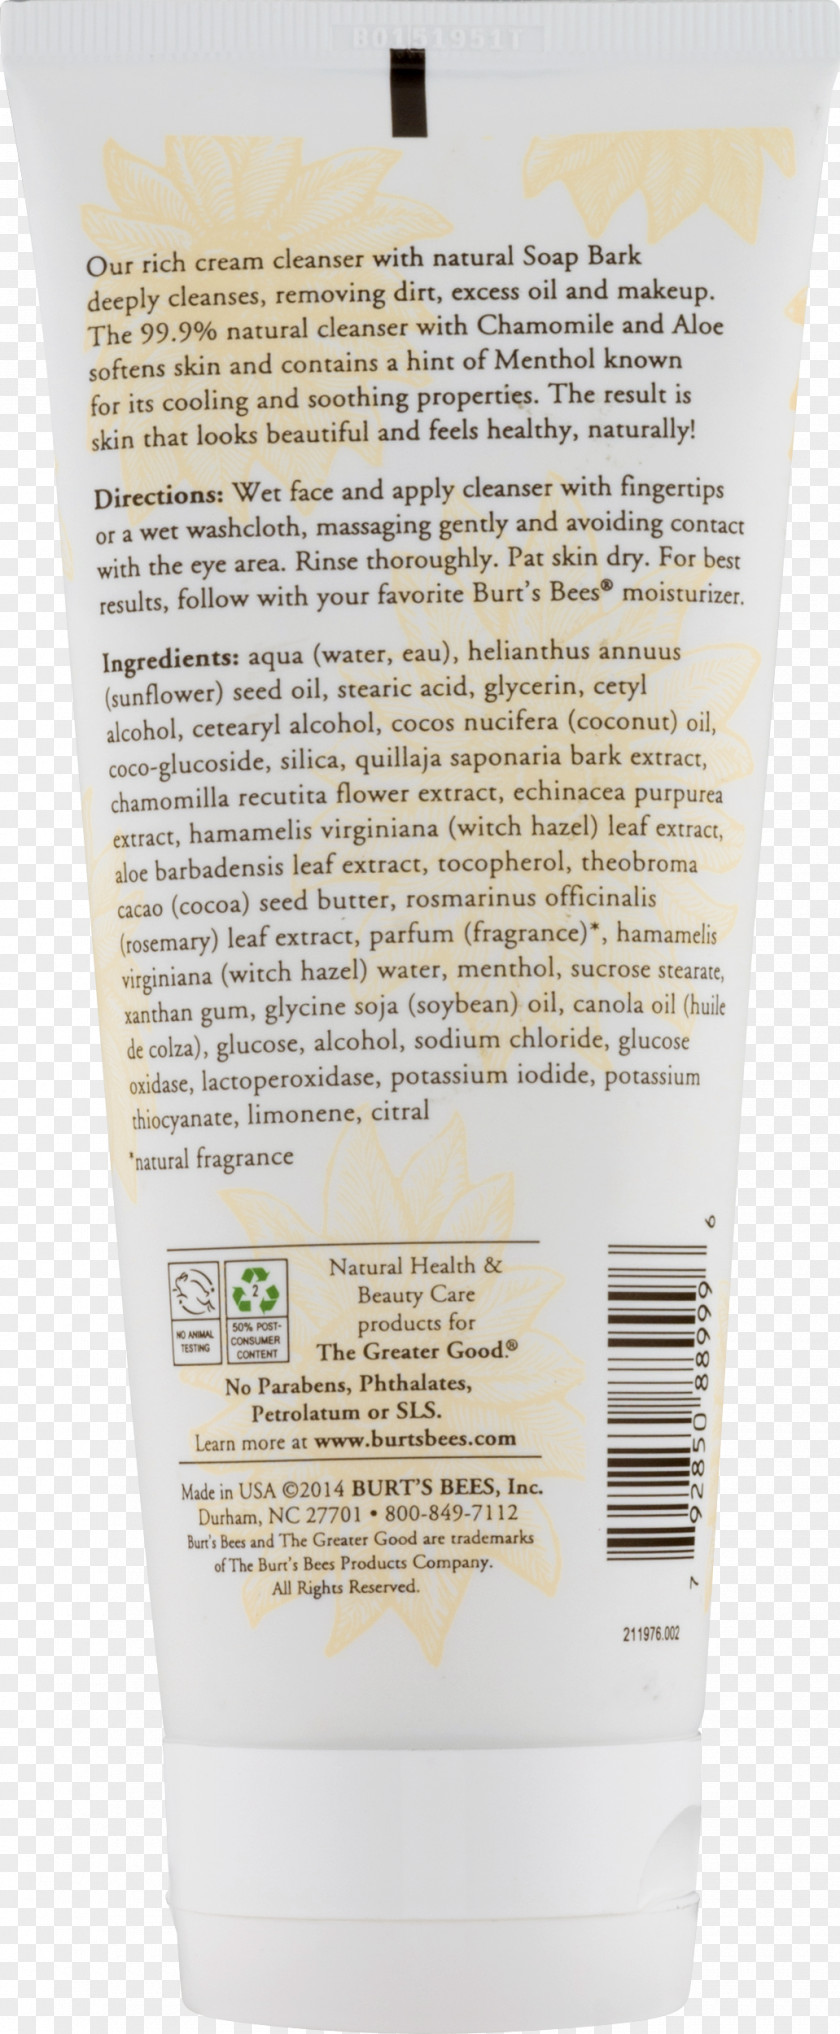 Burt's Bees Soap Bark & Chammomile Deep Cleansing Cream Lotion Cleanser Bees, Inc. PNG